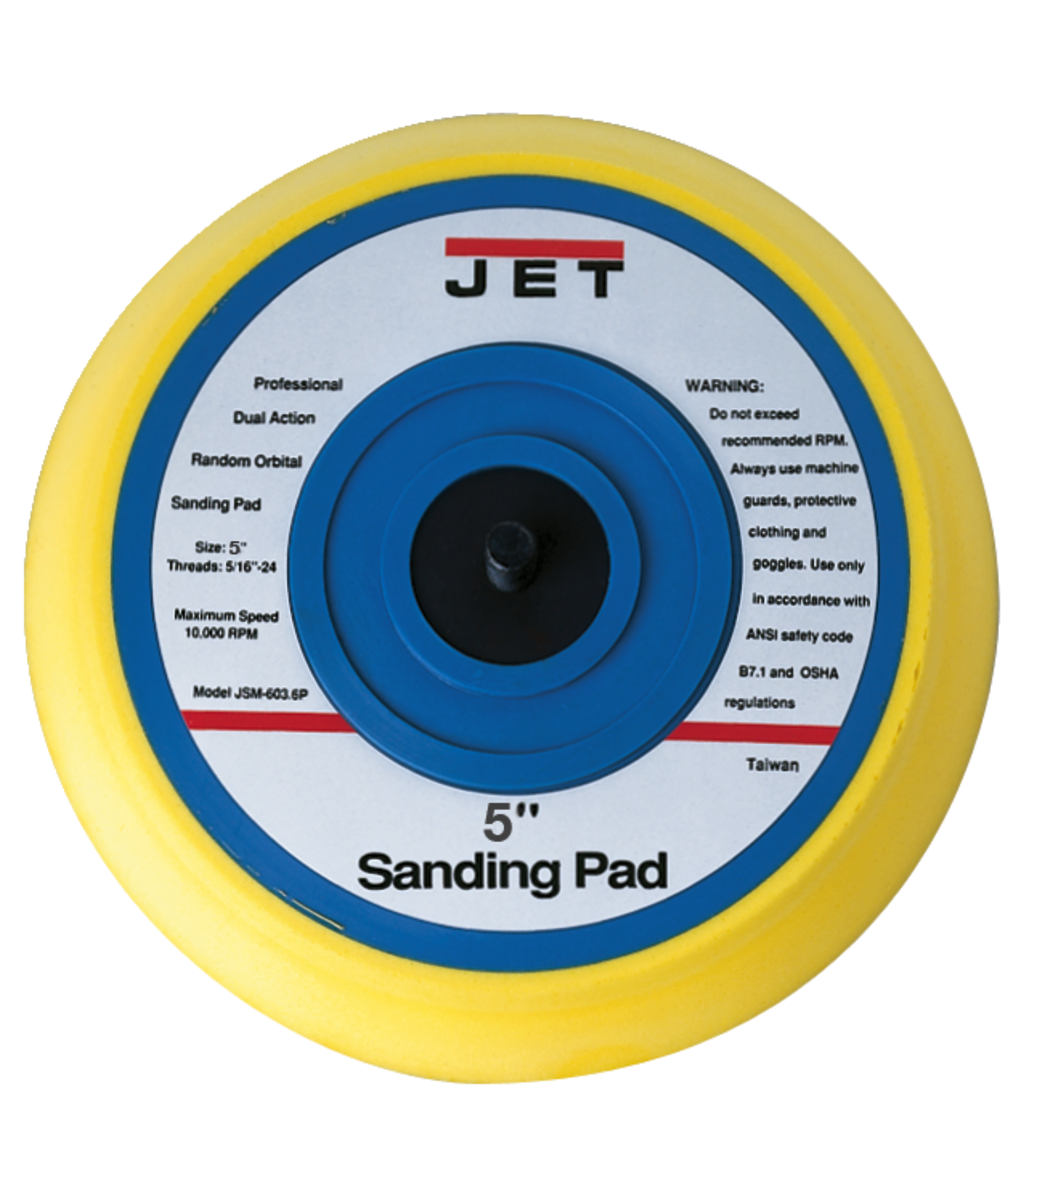 JET Replacement 5" Round Sanding Pad For JSM-603.5 Palm Sander